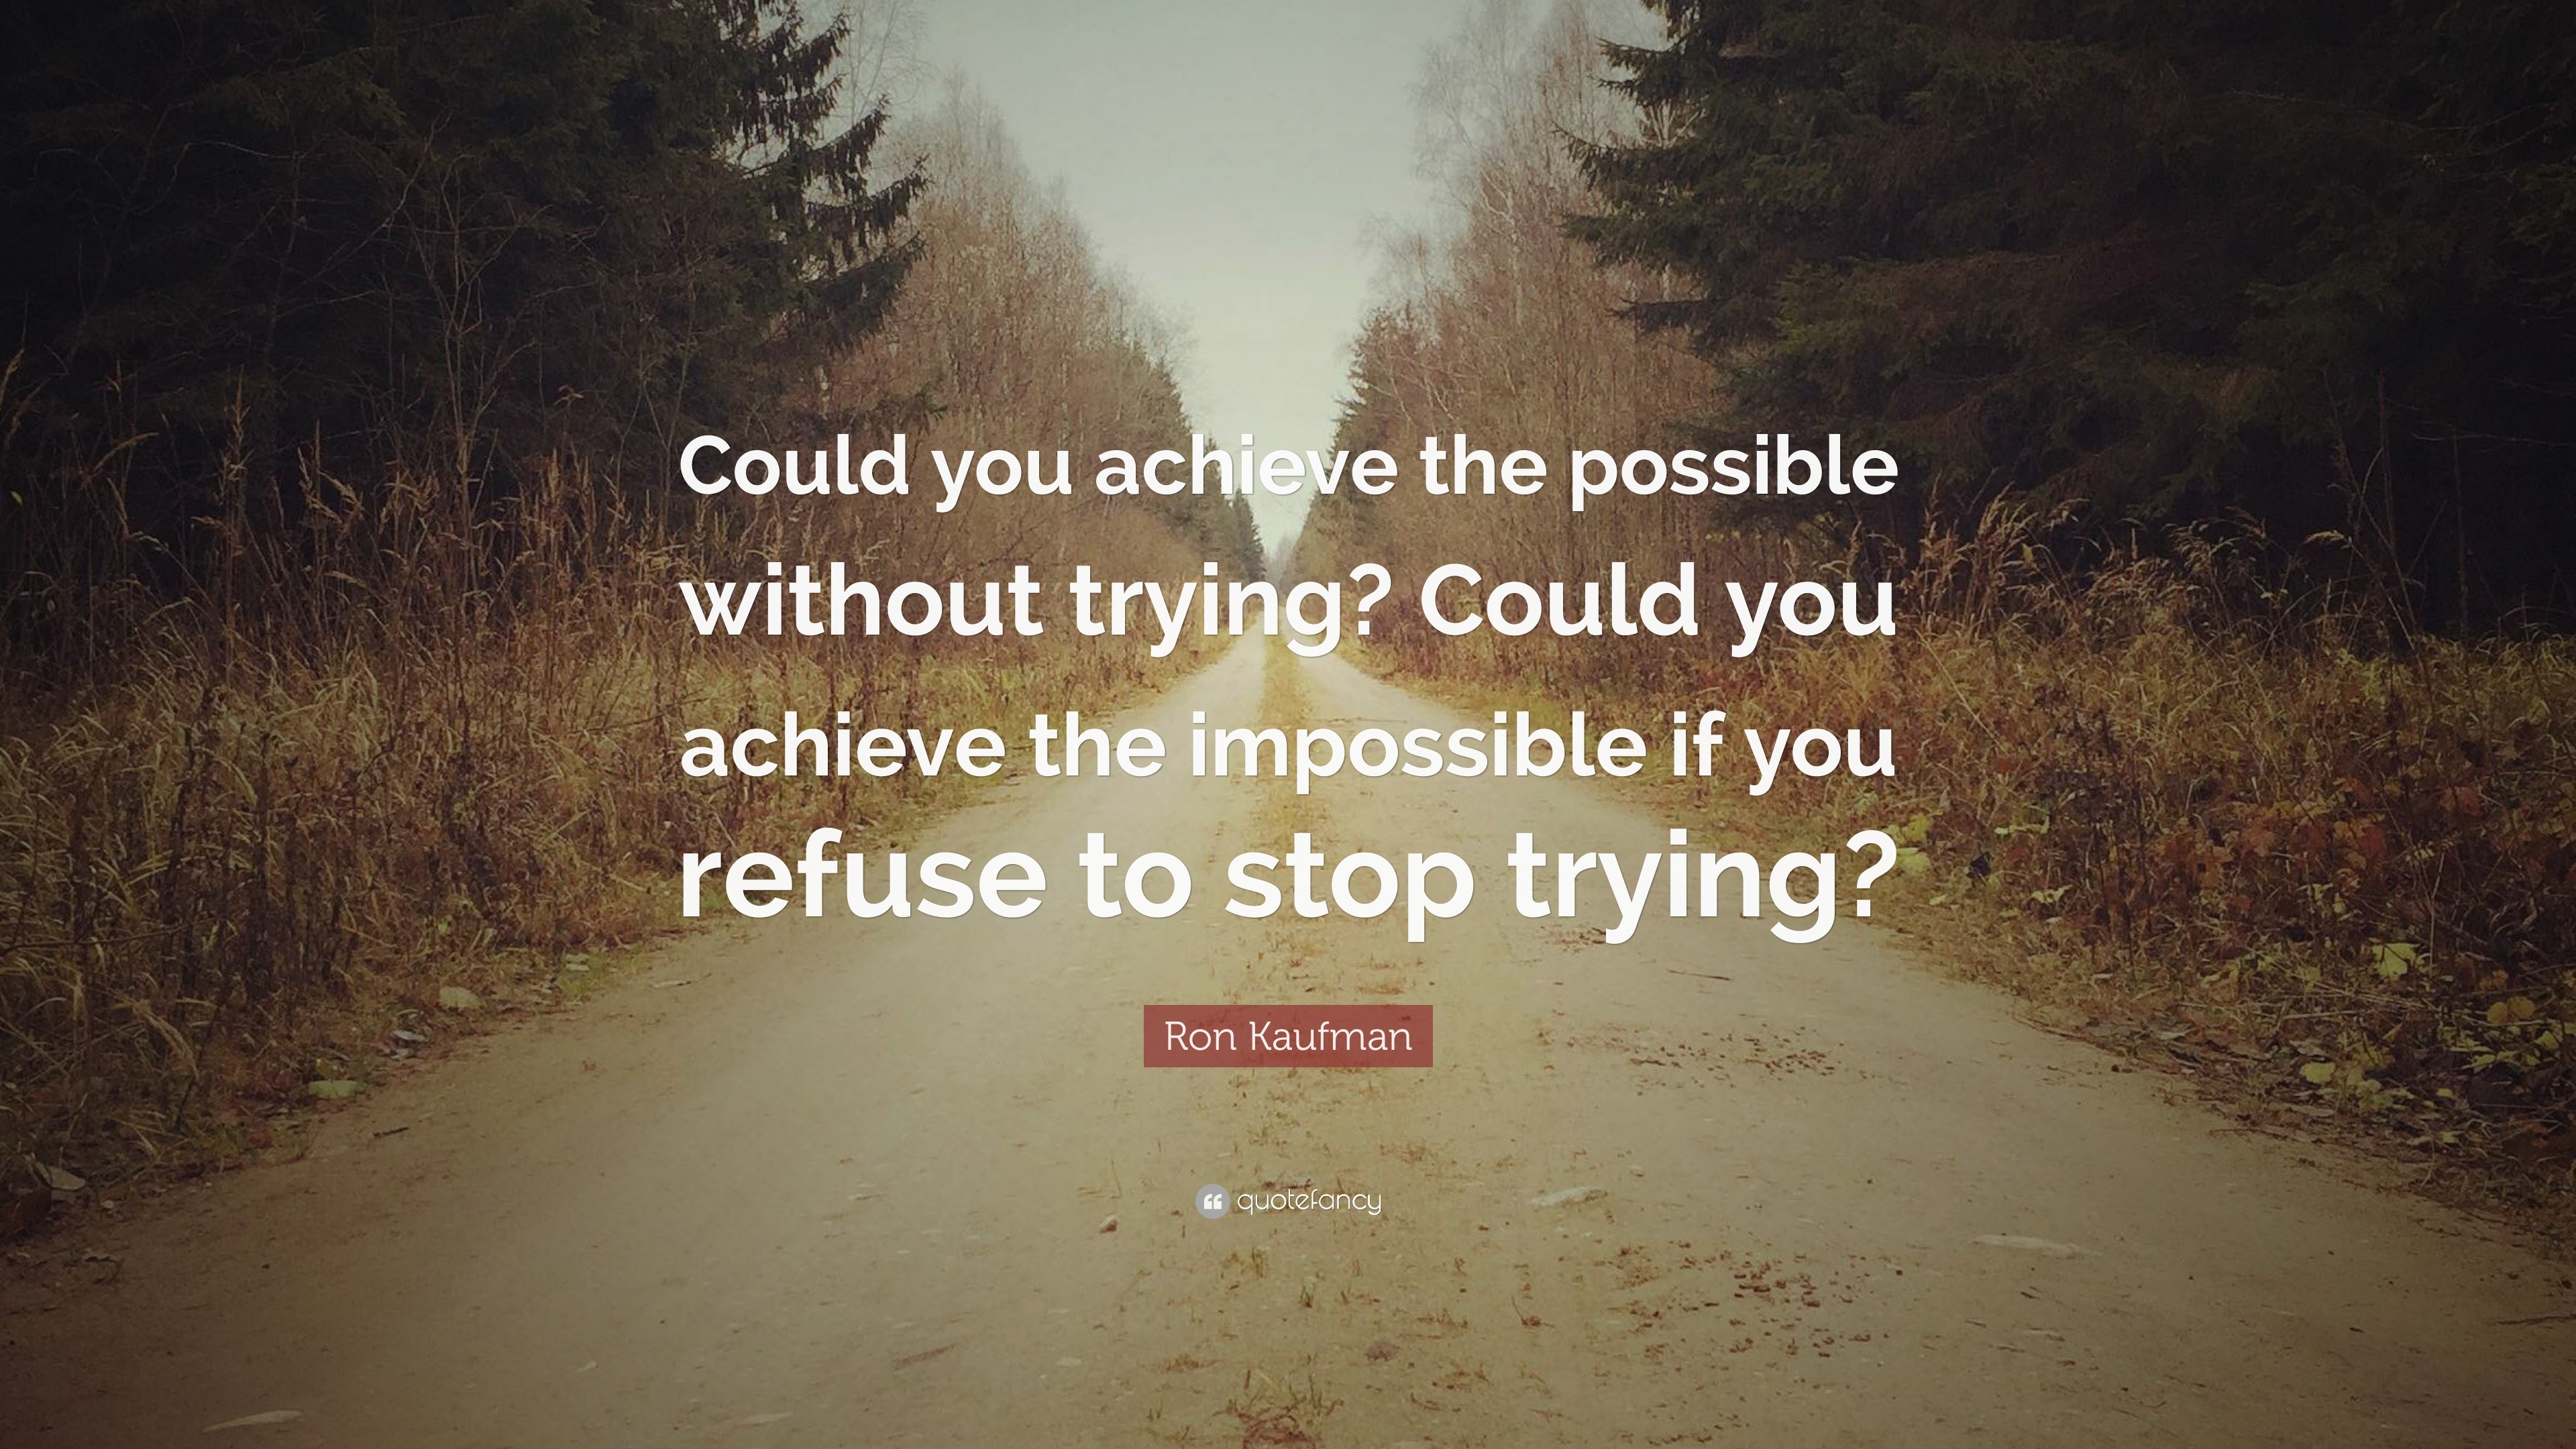 Ron Kaufman Quote: “Could you achieve the possible without trying ...